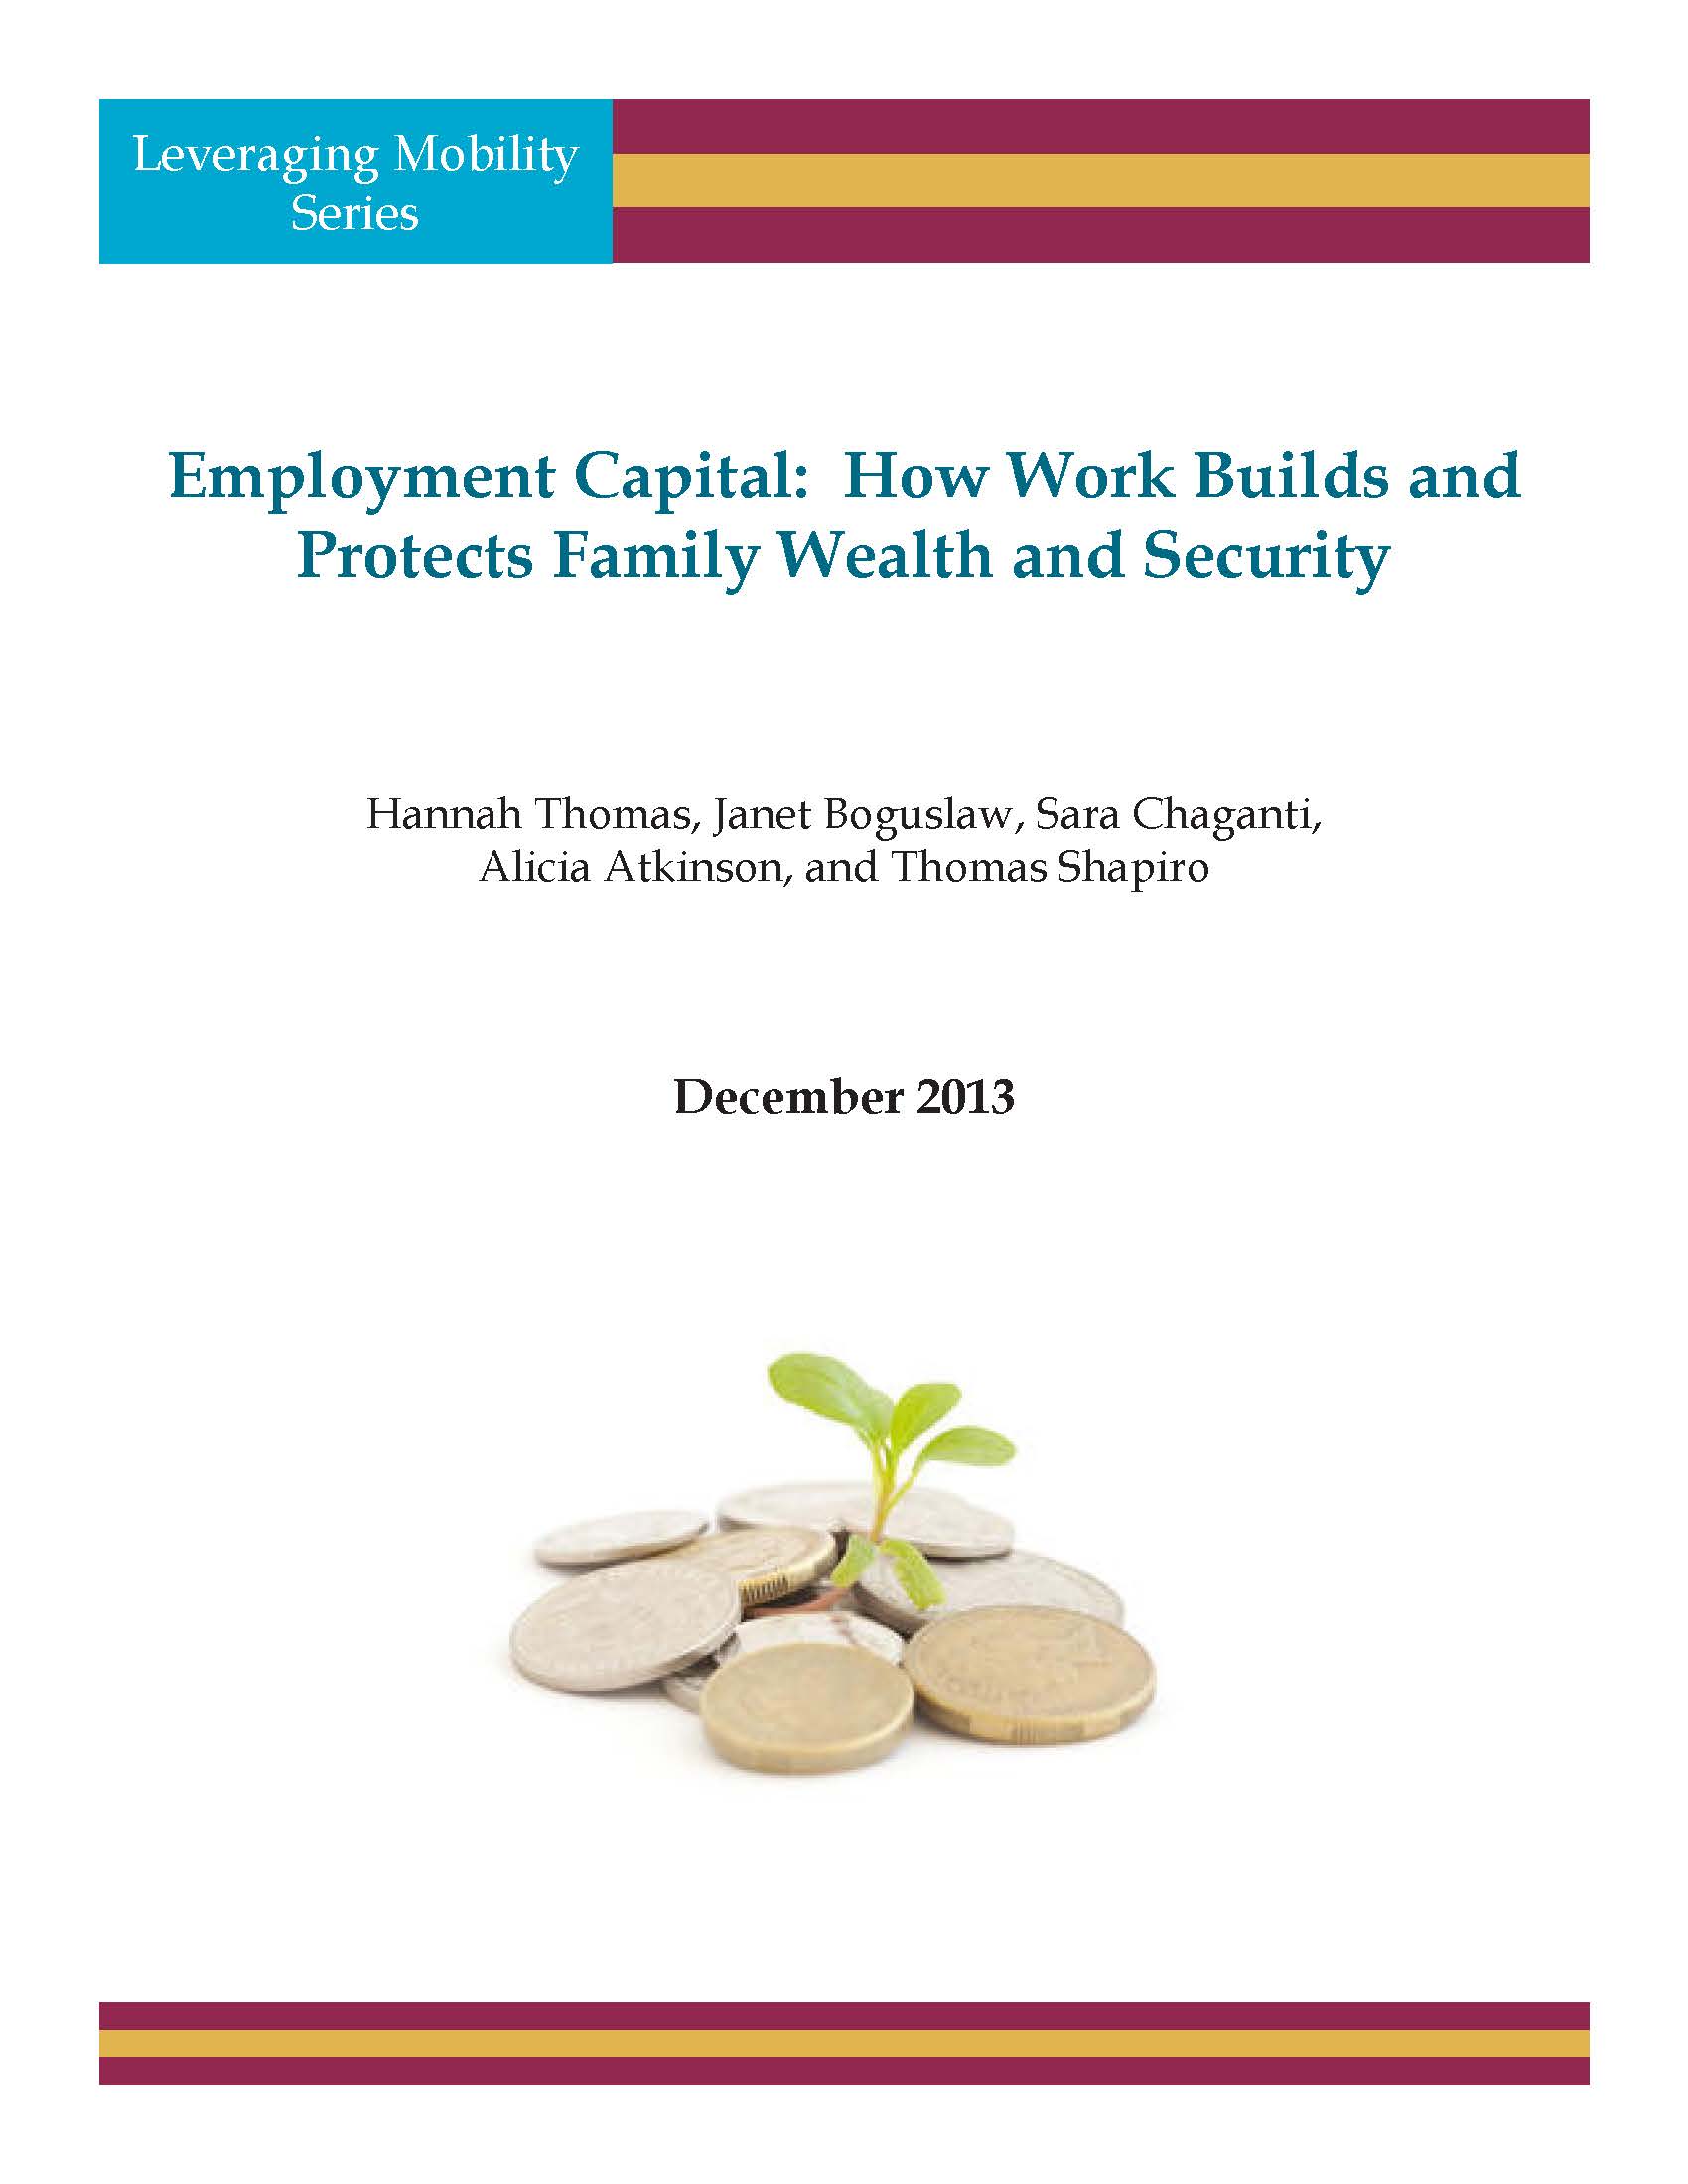 Cover of employment capital report